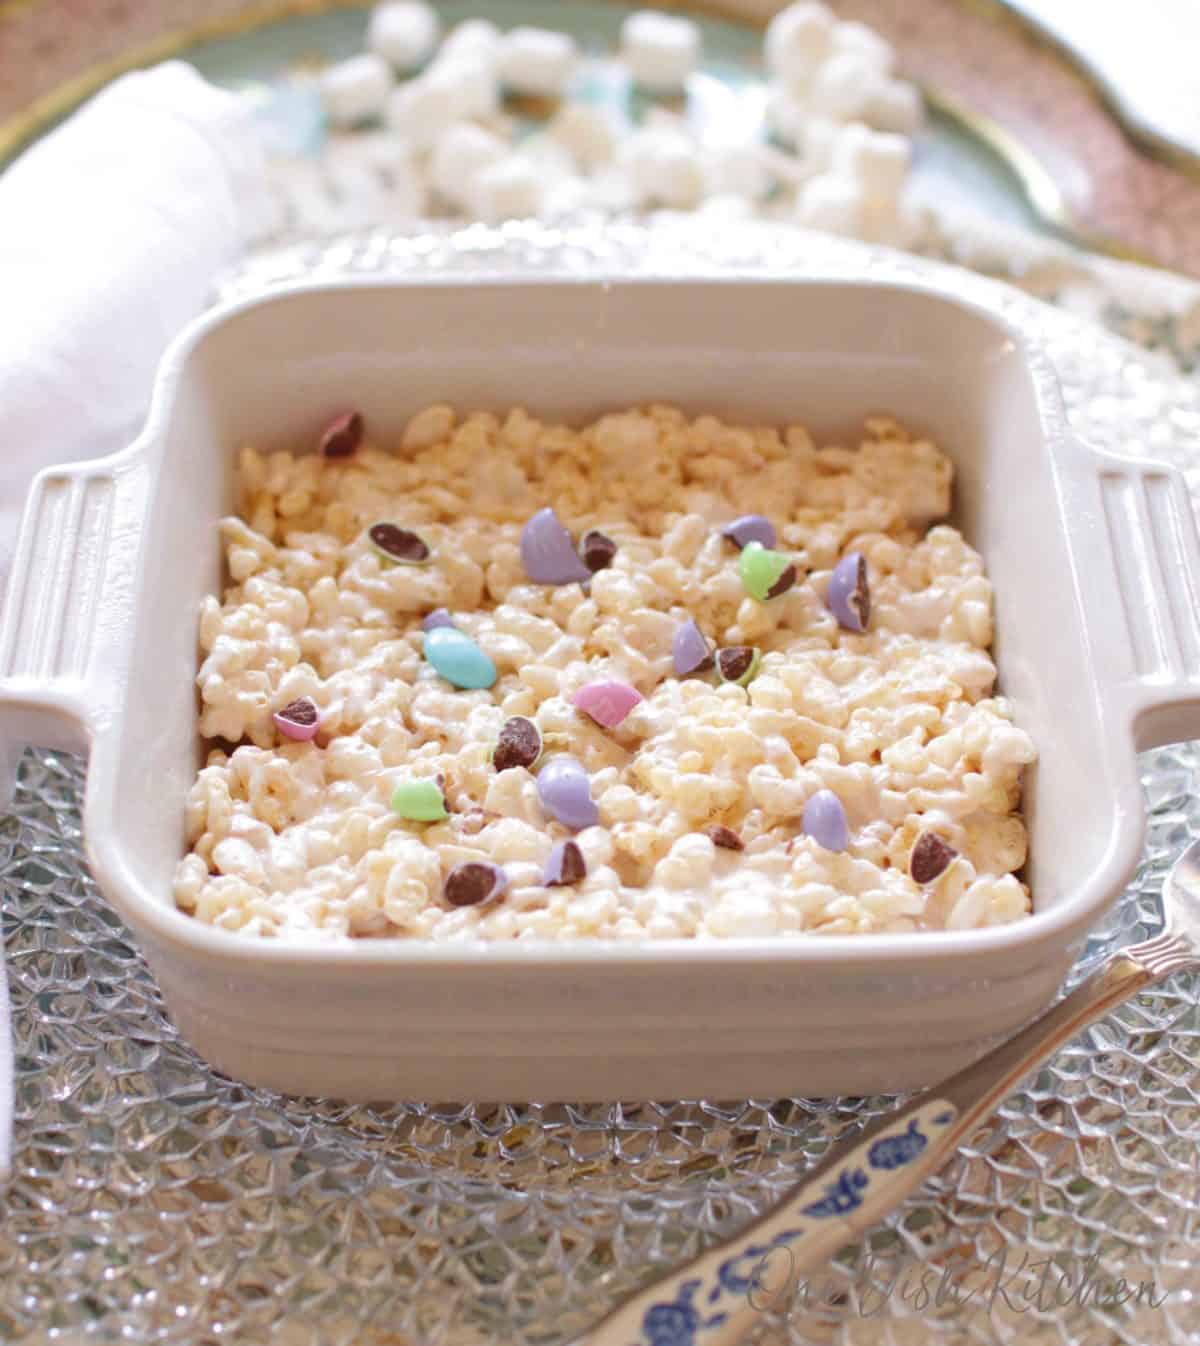 A giant rice krispies treat topped with pastel colored chocolate candies in a small baking dish next to a fork.